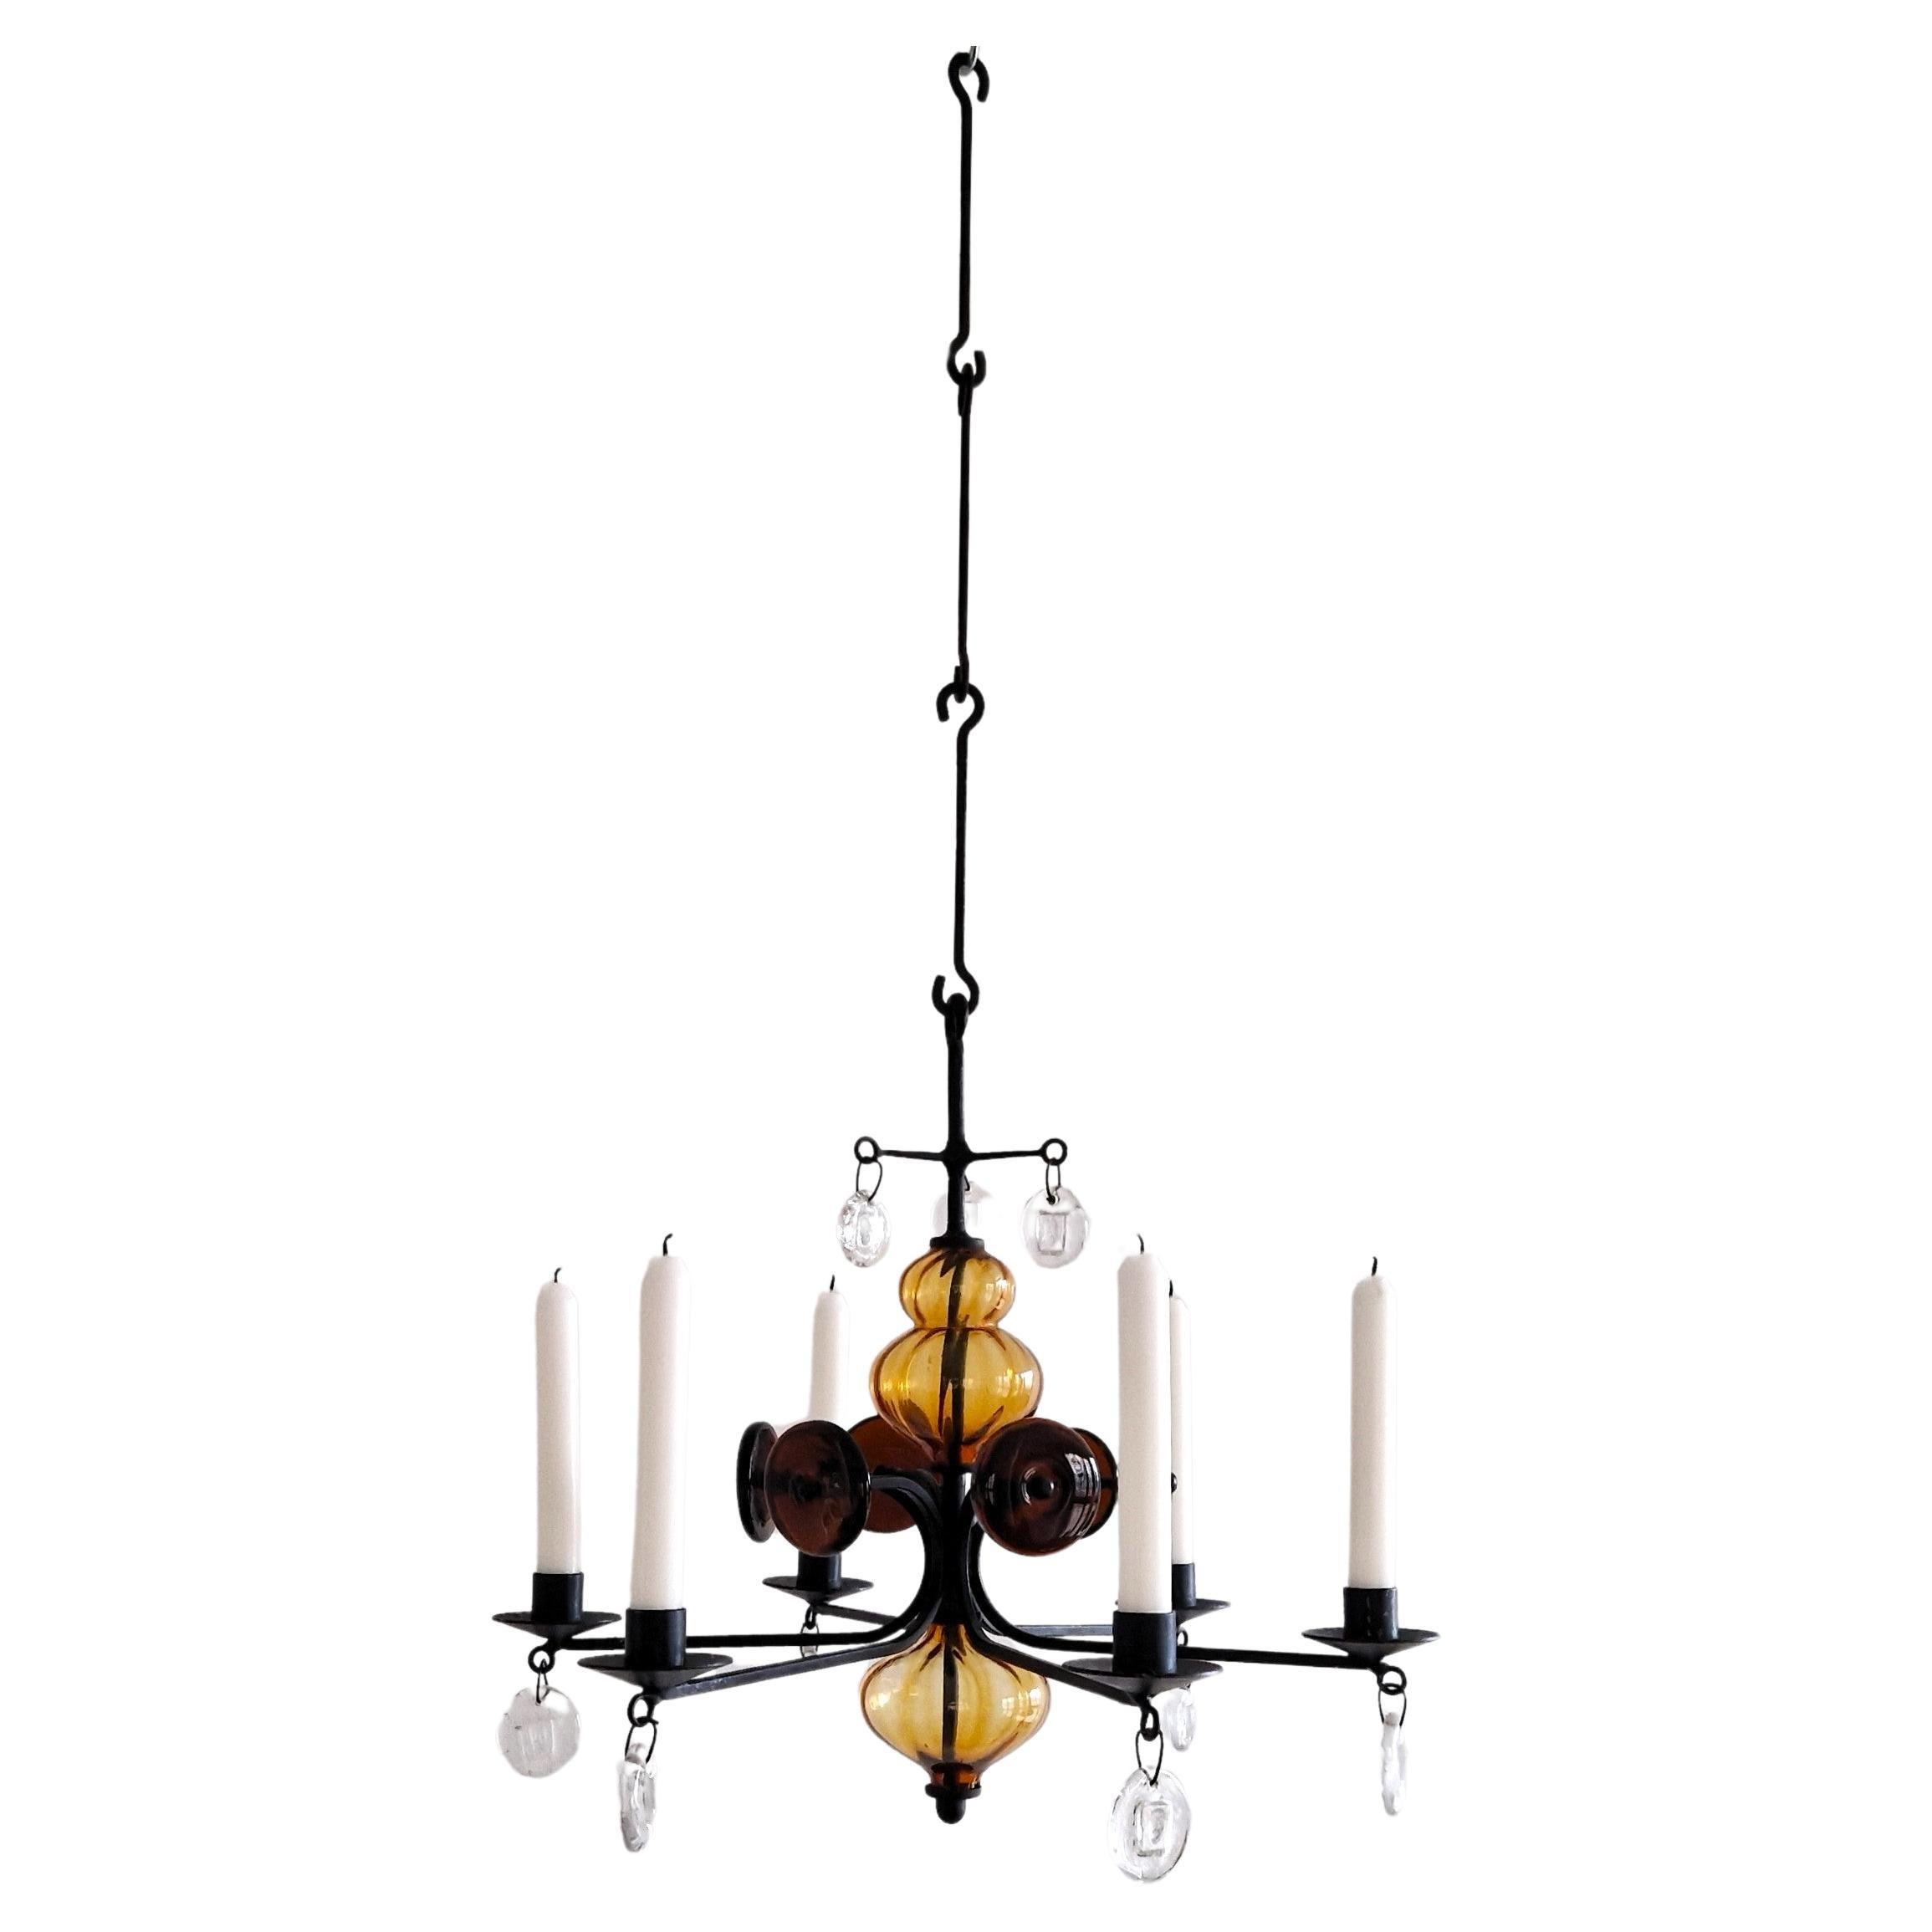 Amber glass and wrought iron chandelier by Erik Höglund for Boda, Sweden